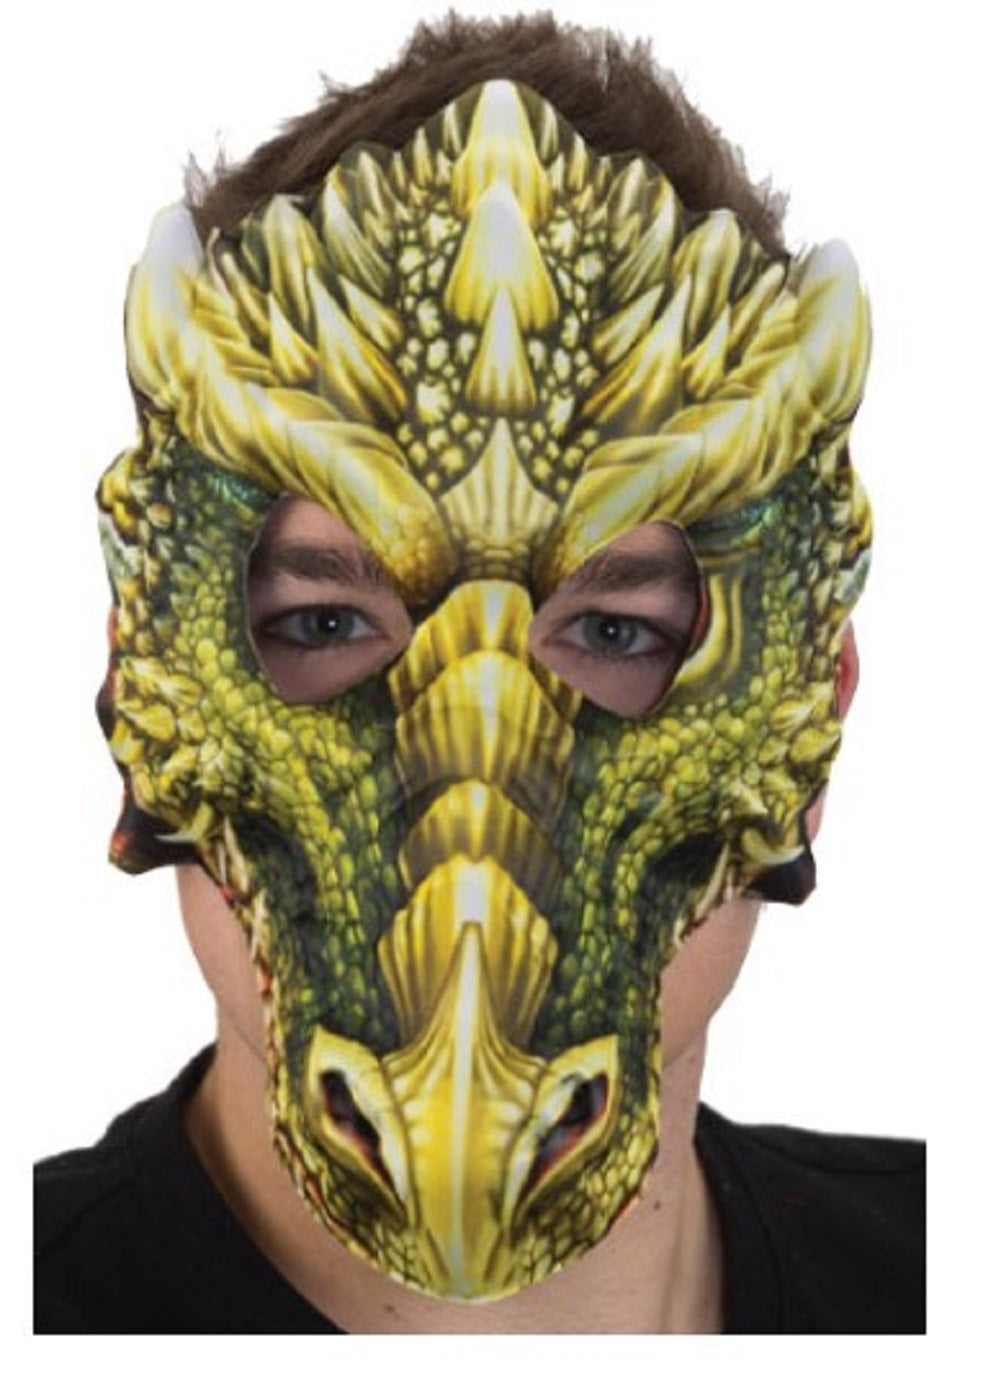 Dragon Half Mask - Sublimated - Yellow/Green - Costume Accessory - Adult Teen